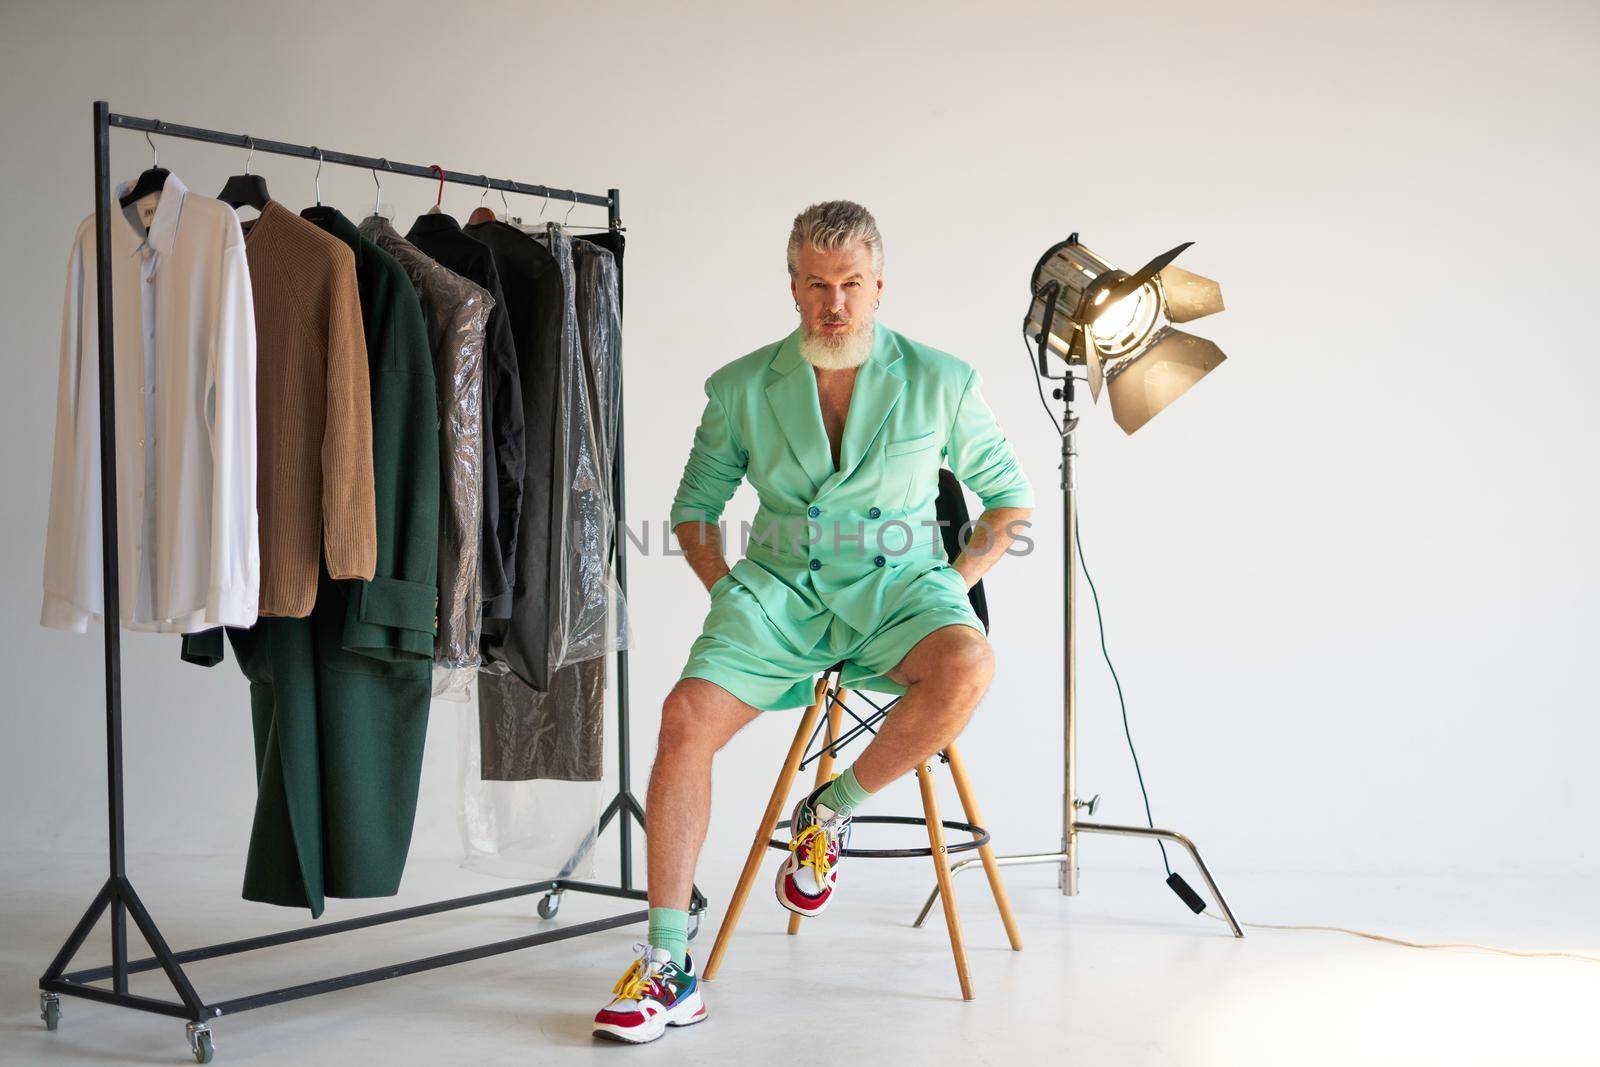 Studio shot of cool middle aged man with beard wearing stylish colorful outfit looking at camera while sitting next to clothes rail and studio spotlight over white background. Fashion photoshoot